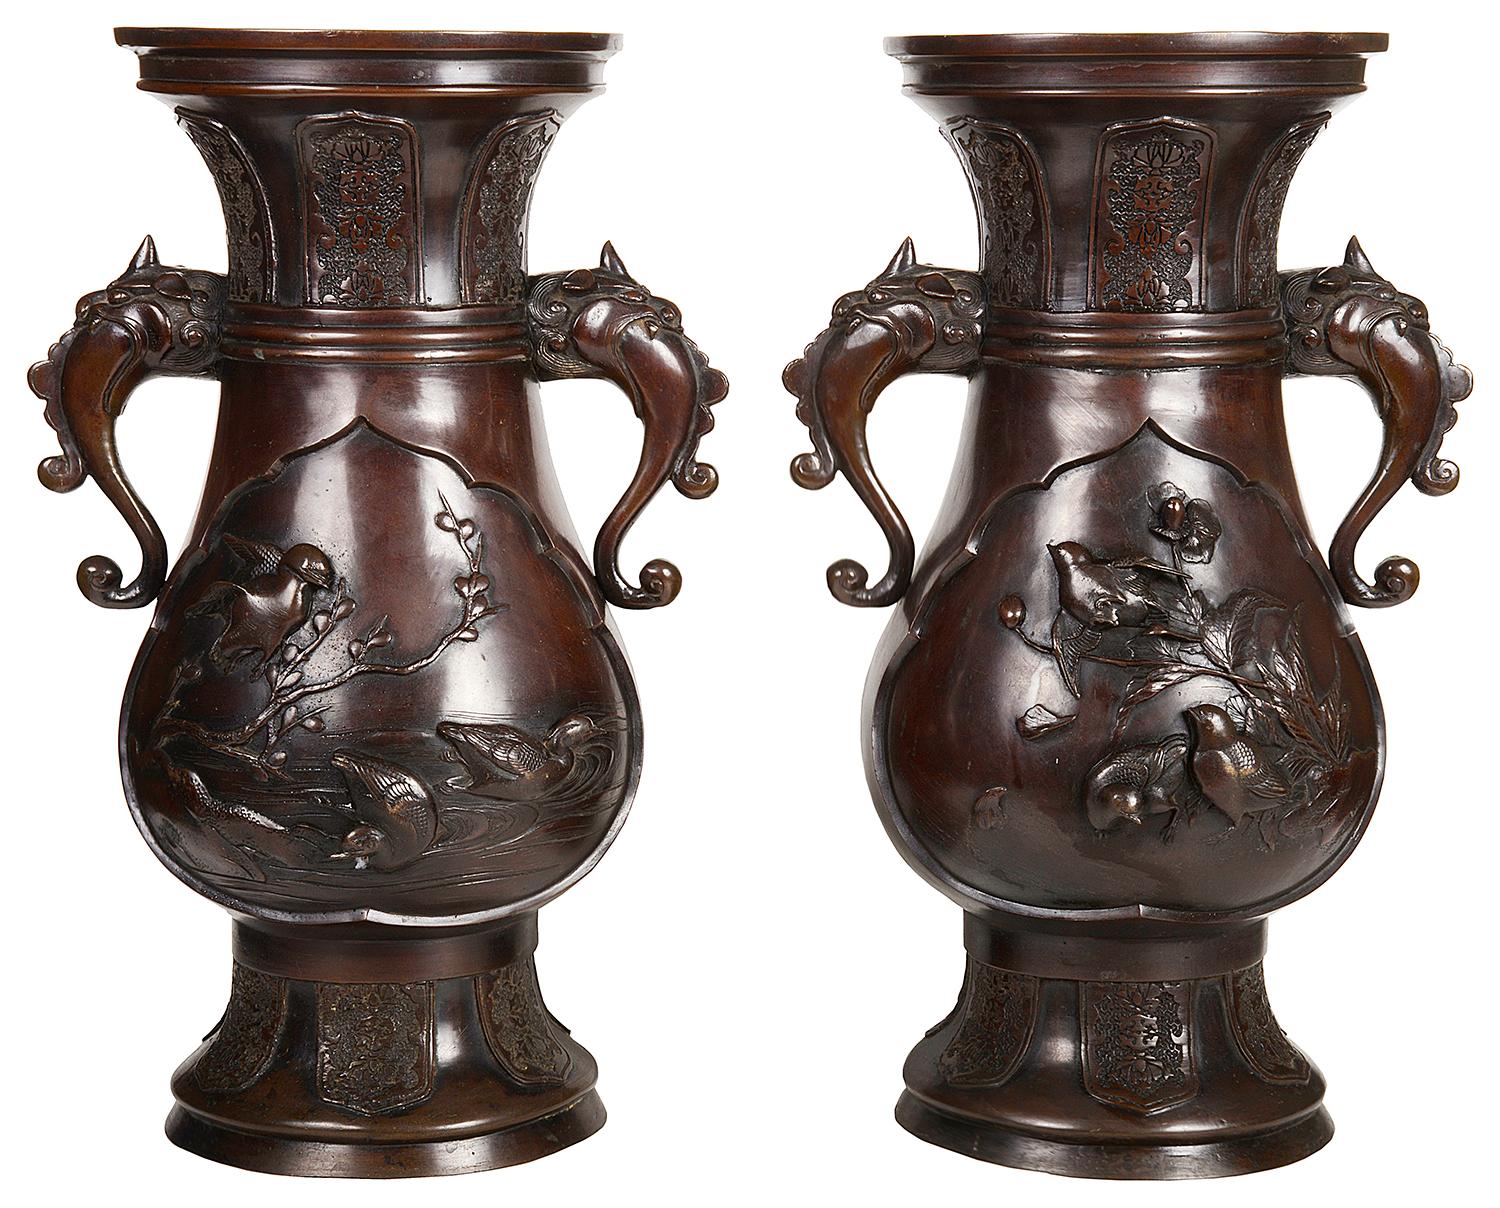 An impressive pair of late 19th century (Meiji period 1868-1912) Japanese bronze vases / lamps. Each with
re-leaf decoration of birds and trees, mythical creatures as handles either side and classical motif decoration to the necks and bases.
These